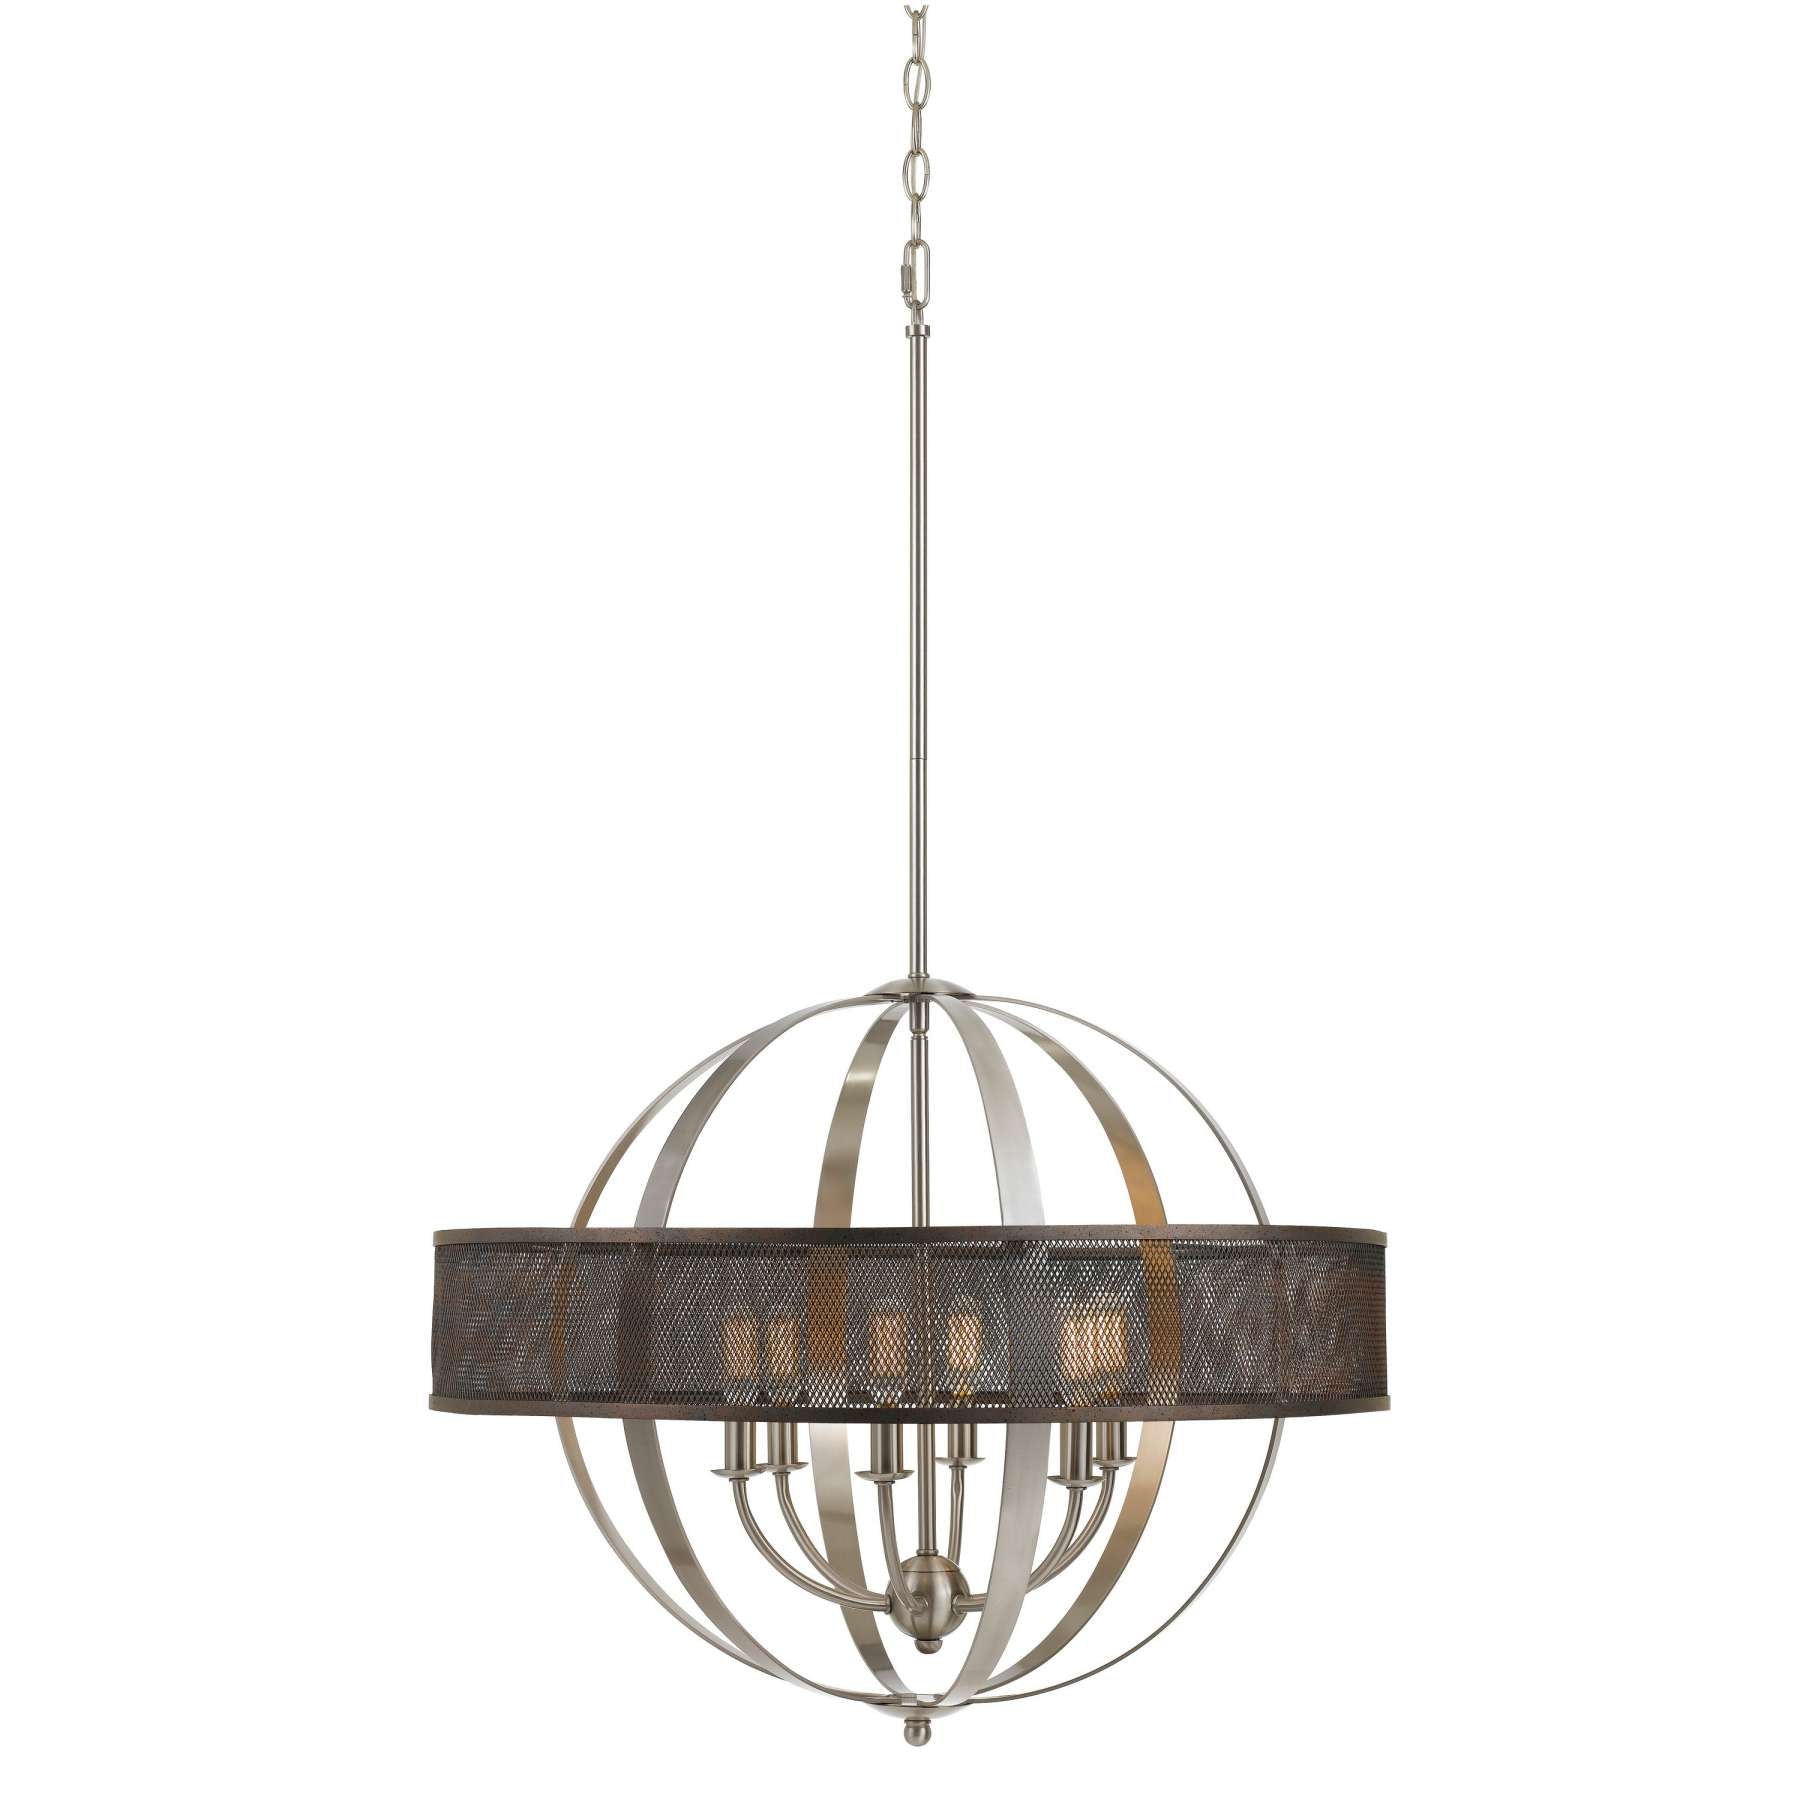 6 Bulb Round Metal Chandelier With Mesh Design, Chrome And Gray By Benzara